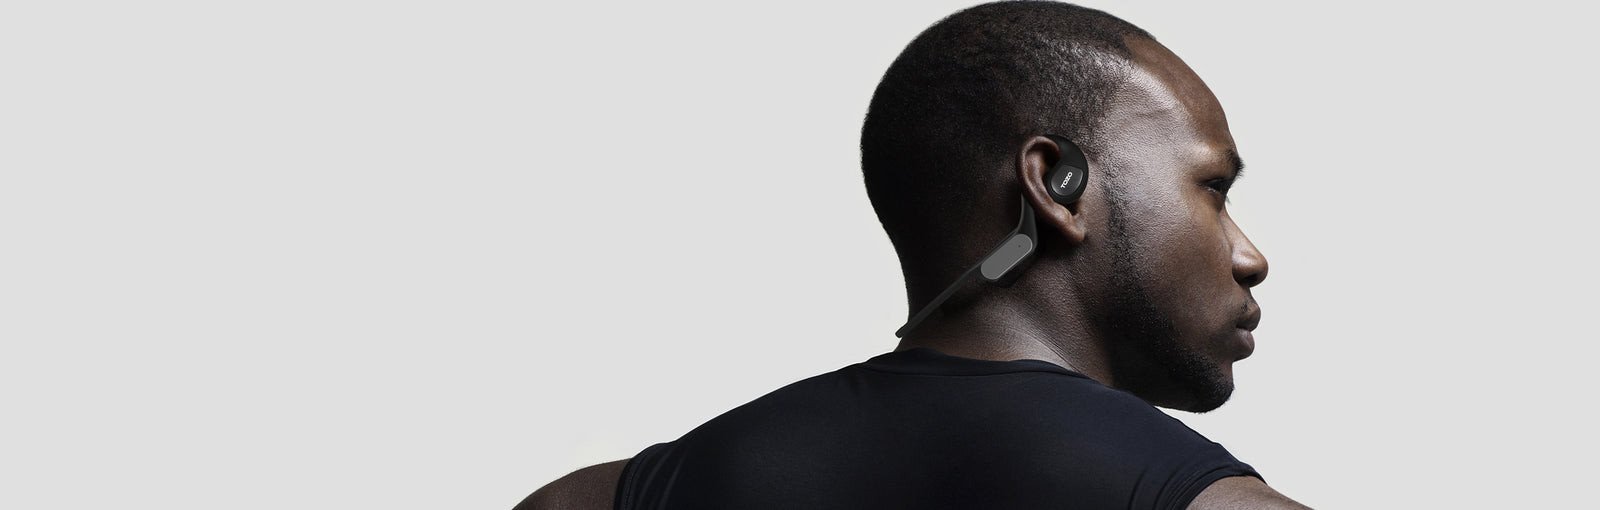 TOZO OpenReal Open-ear design with more awareness of surroundings